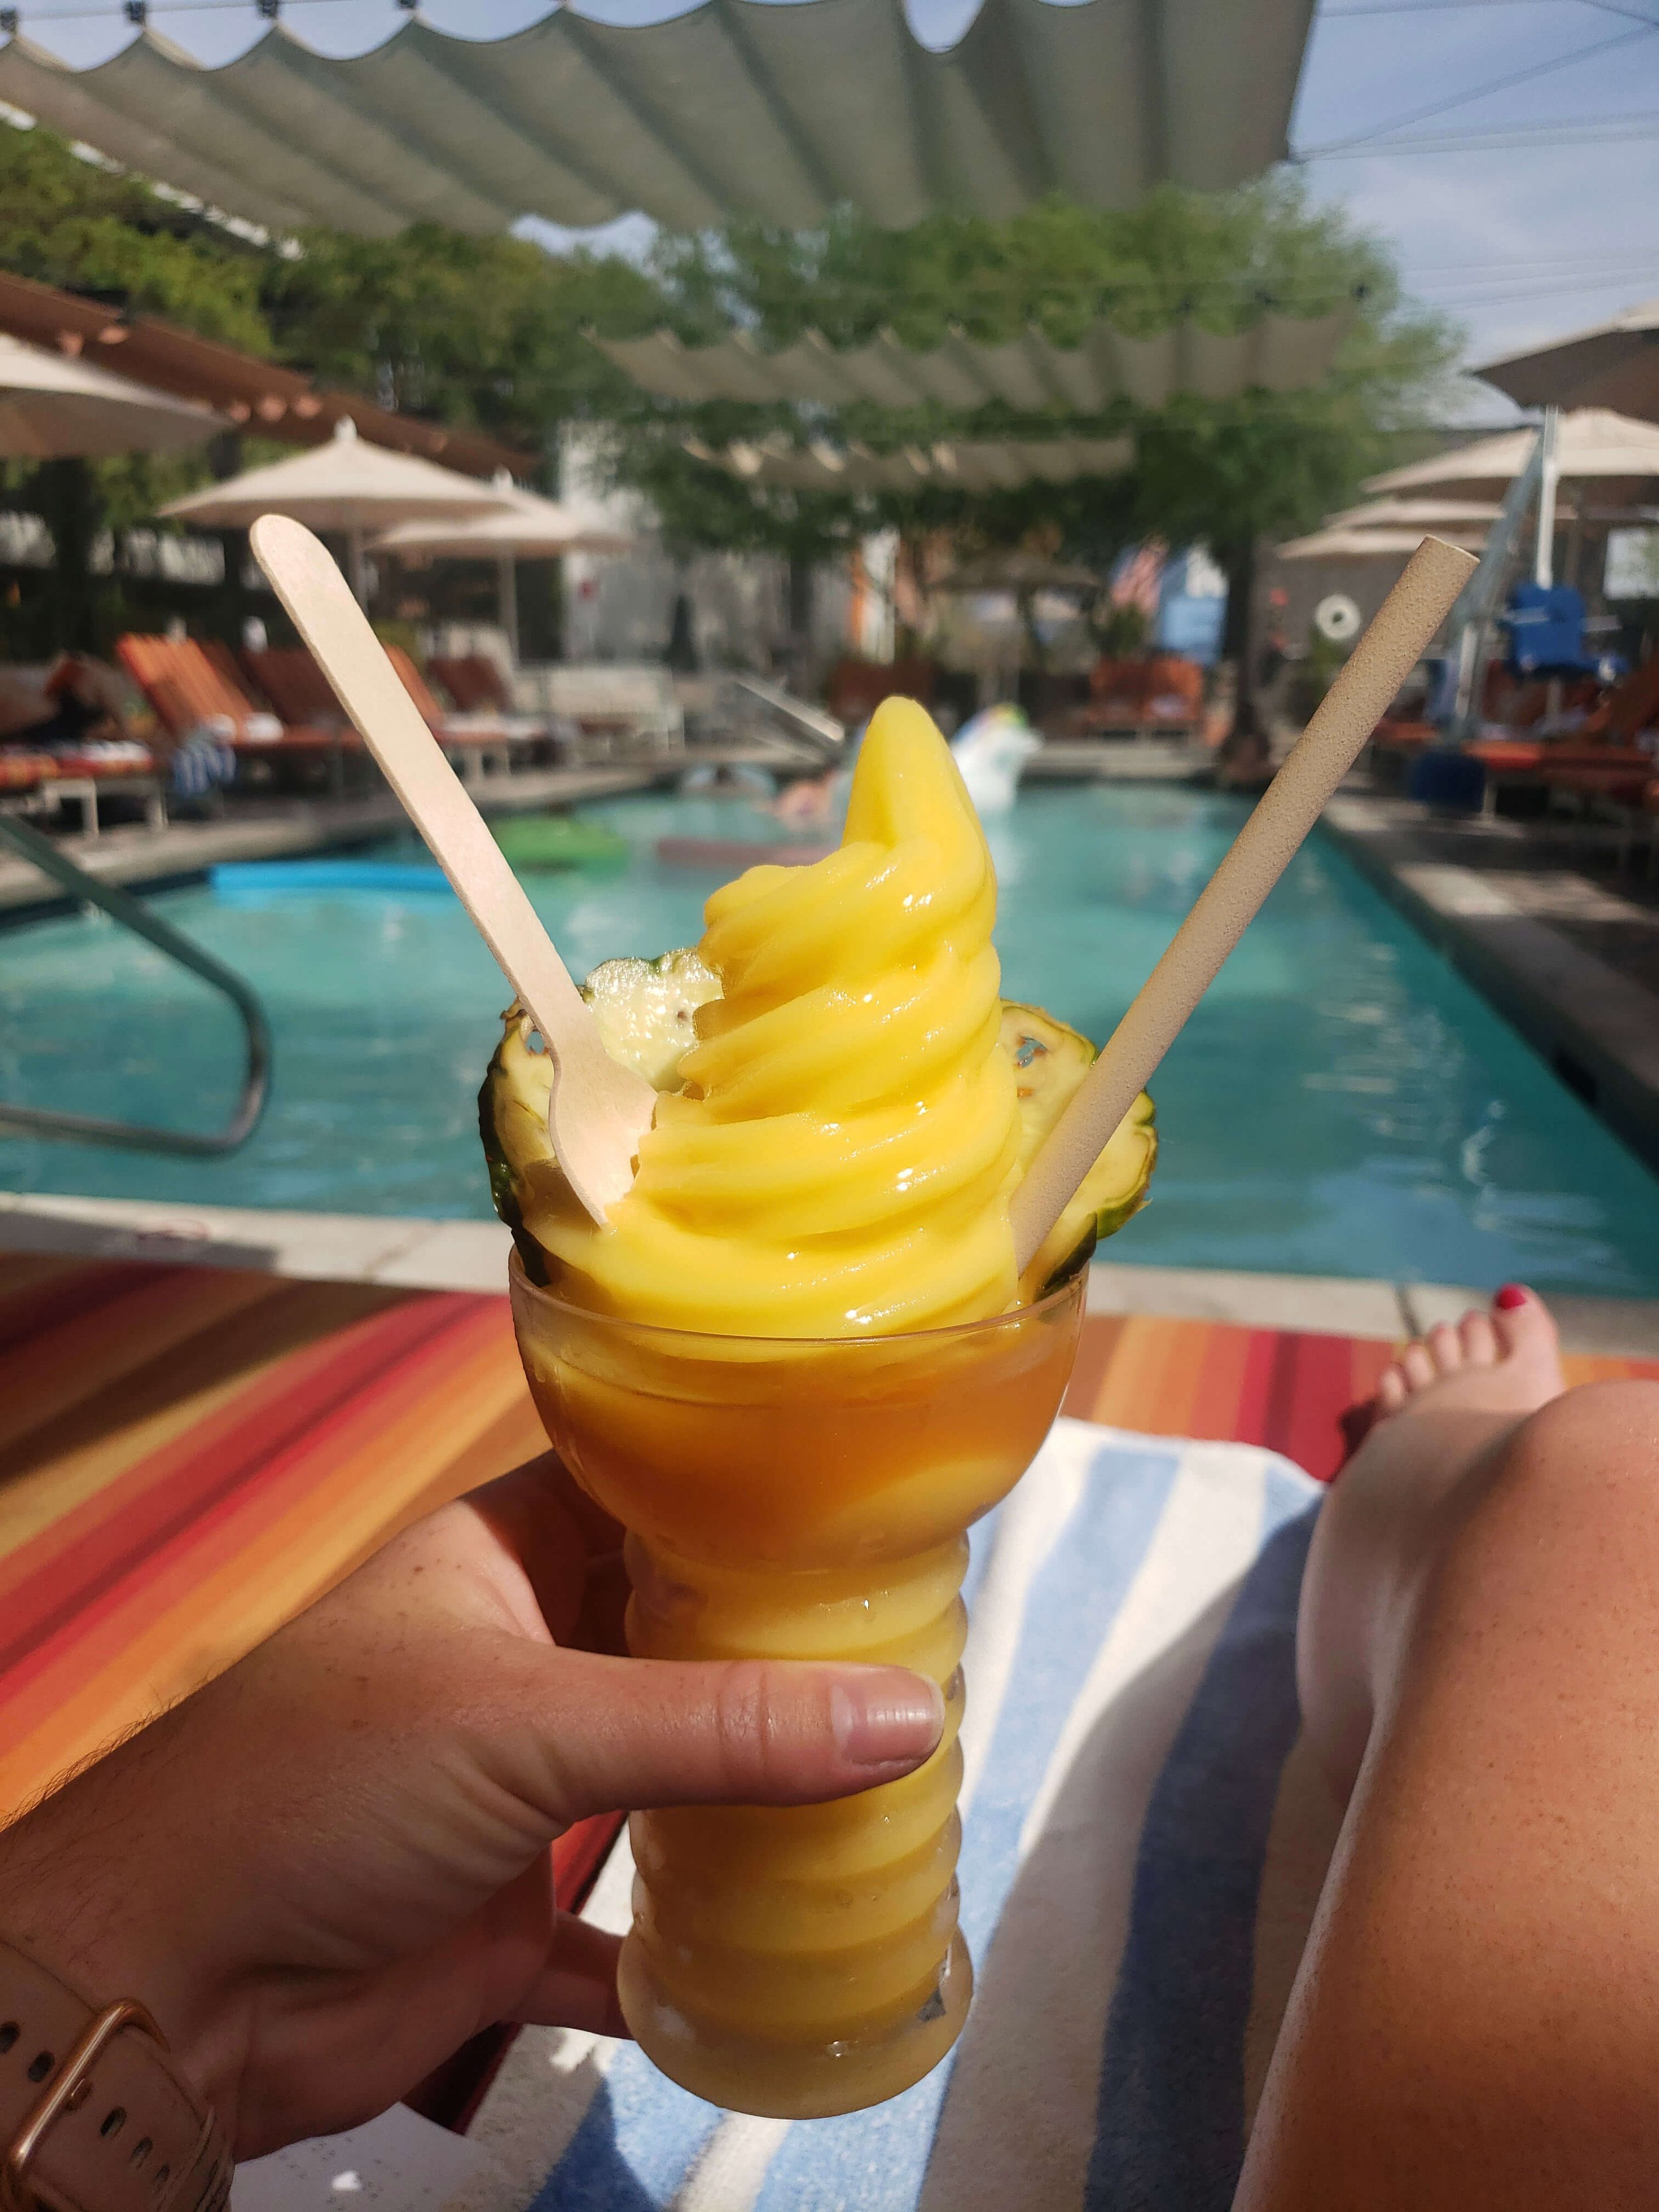 Rise Uptown Phoenix - Hotel pool with Adult Dole-Whip